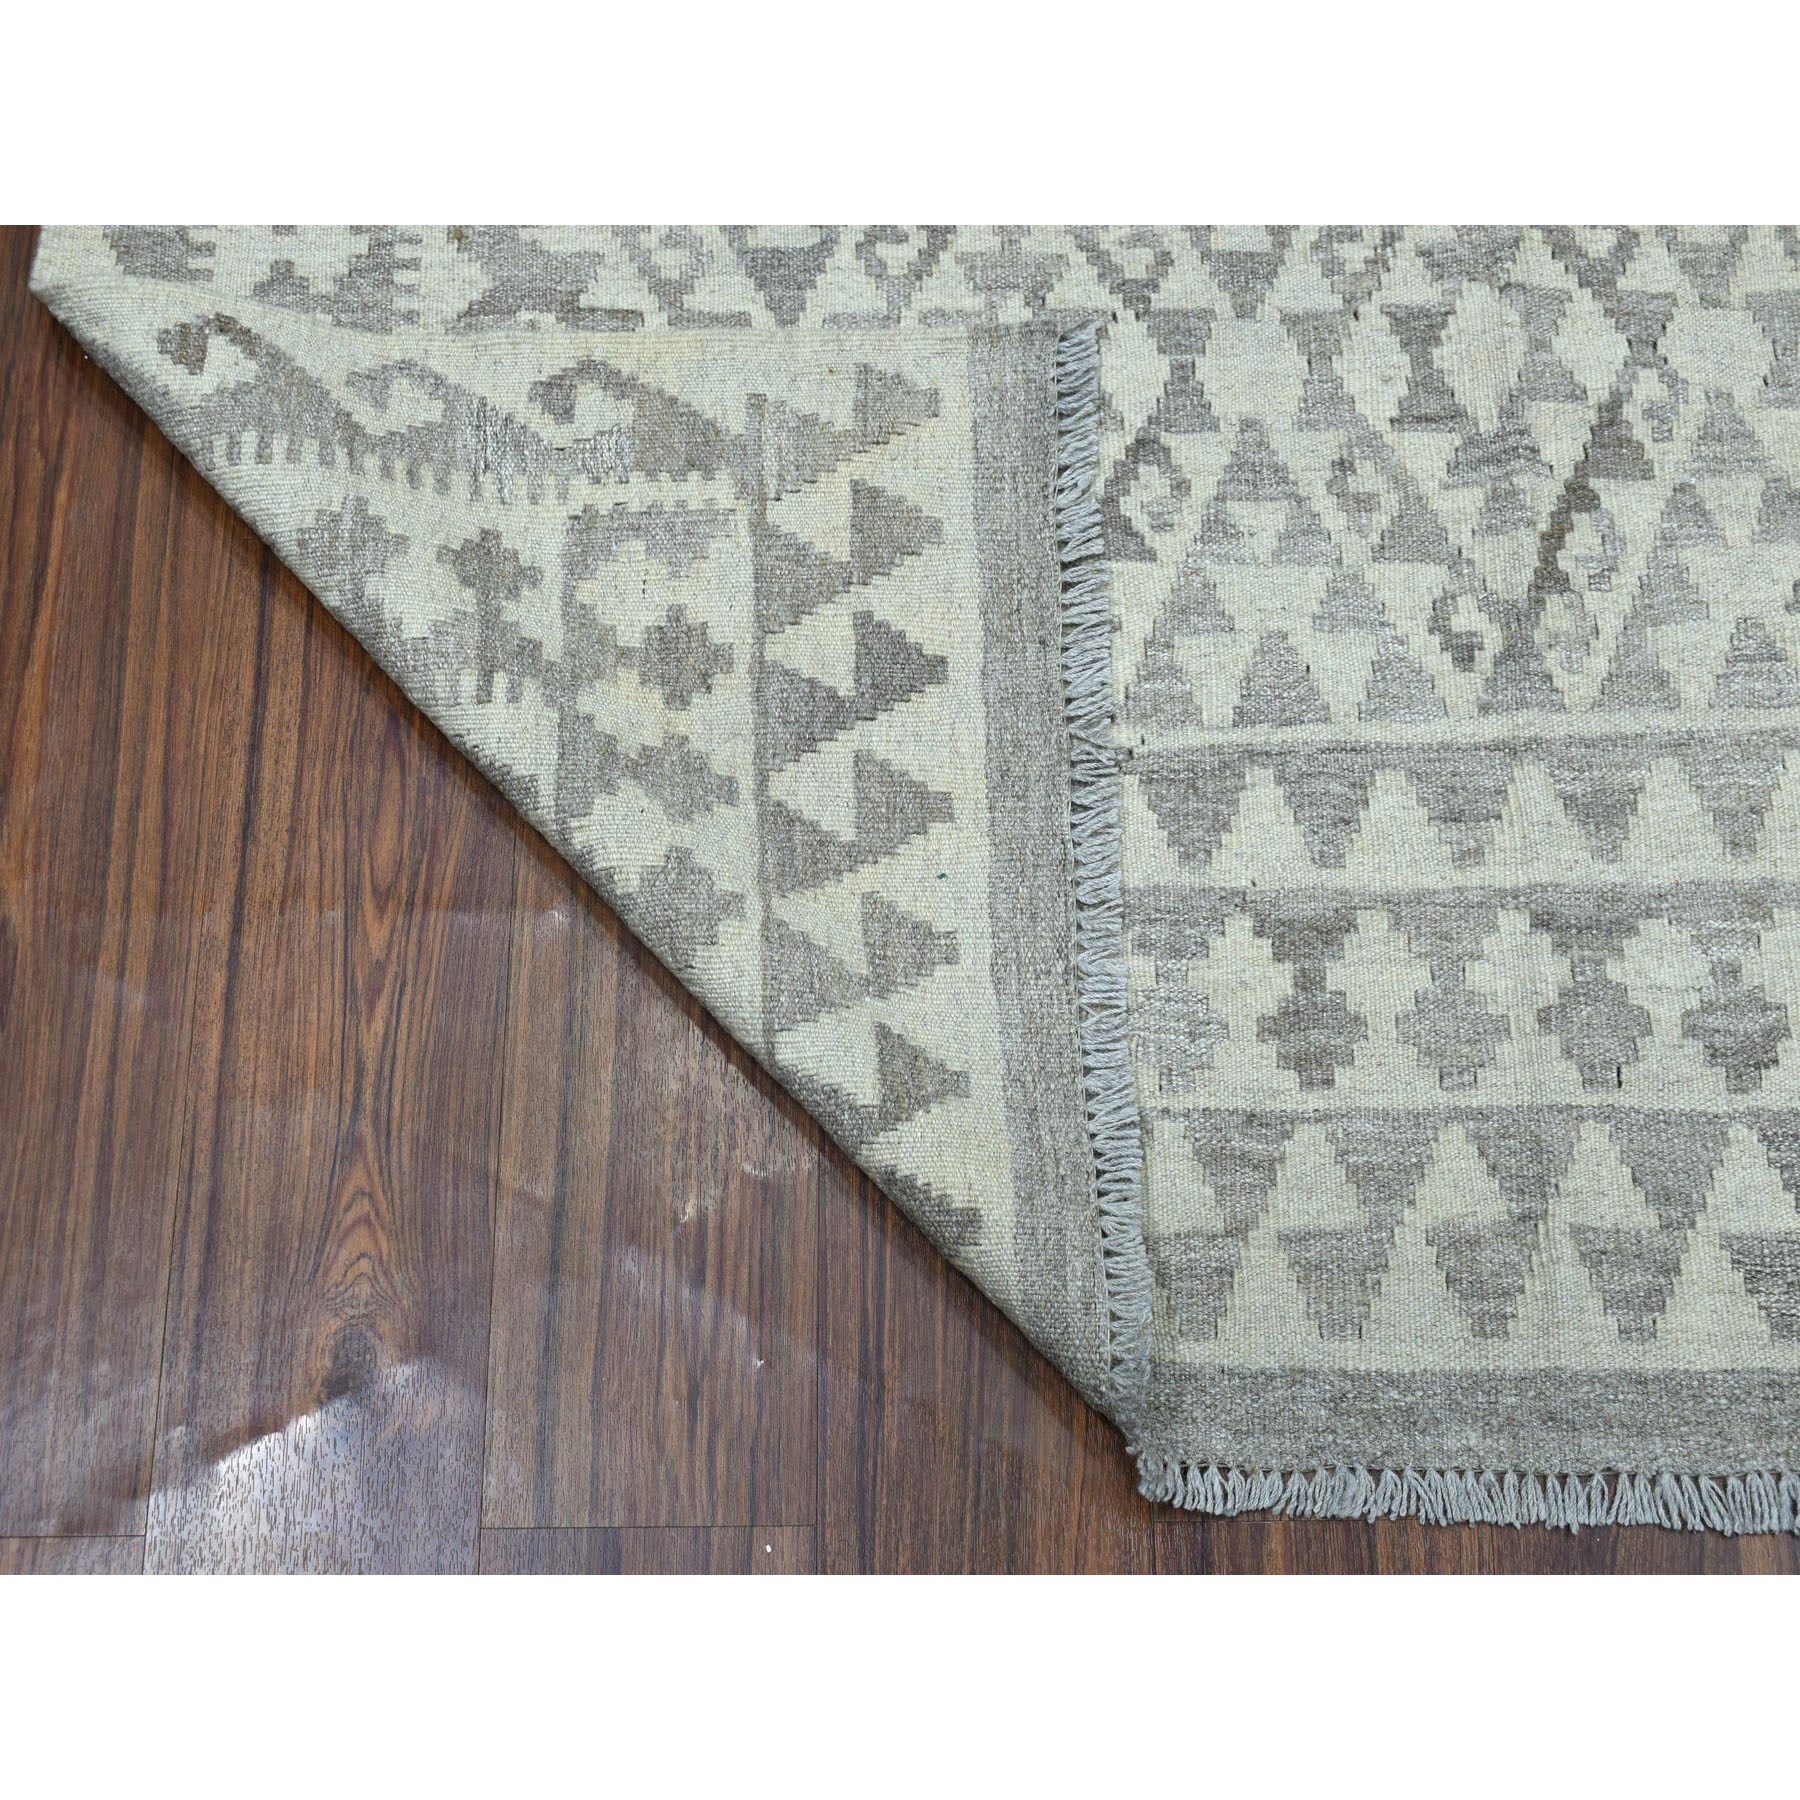 5-3 x6-4  Undyed Reversible Natural Wool Afghan Kilim Hand Woven Oriental Rug 